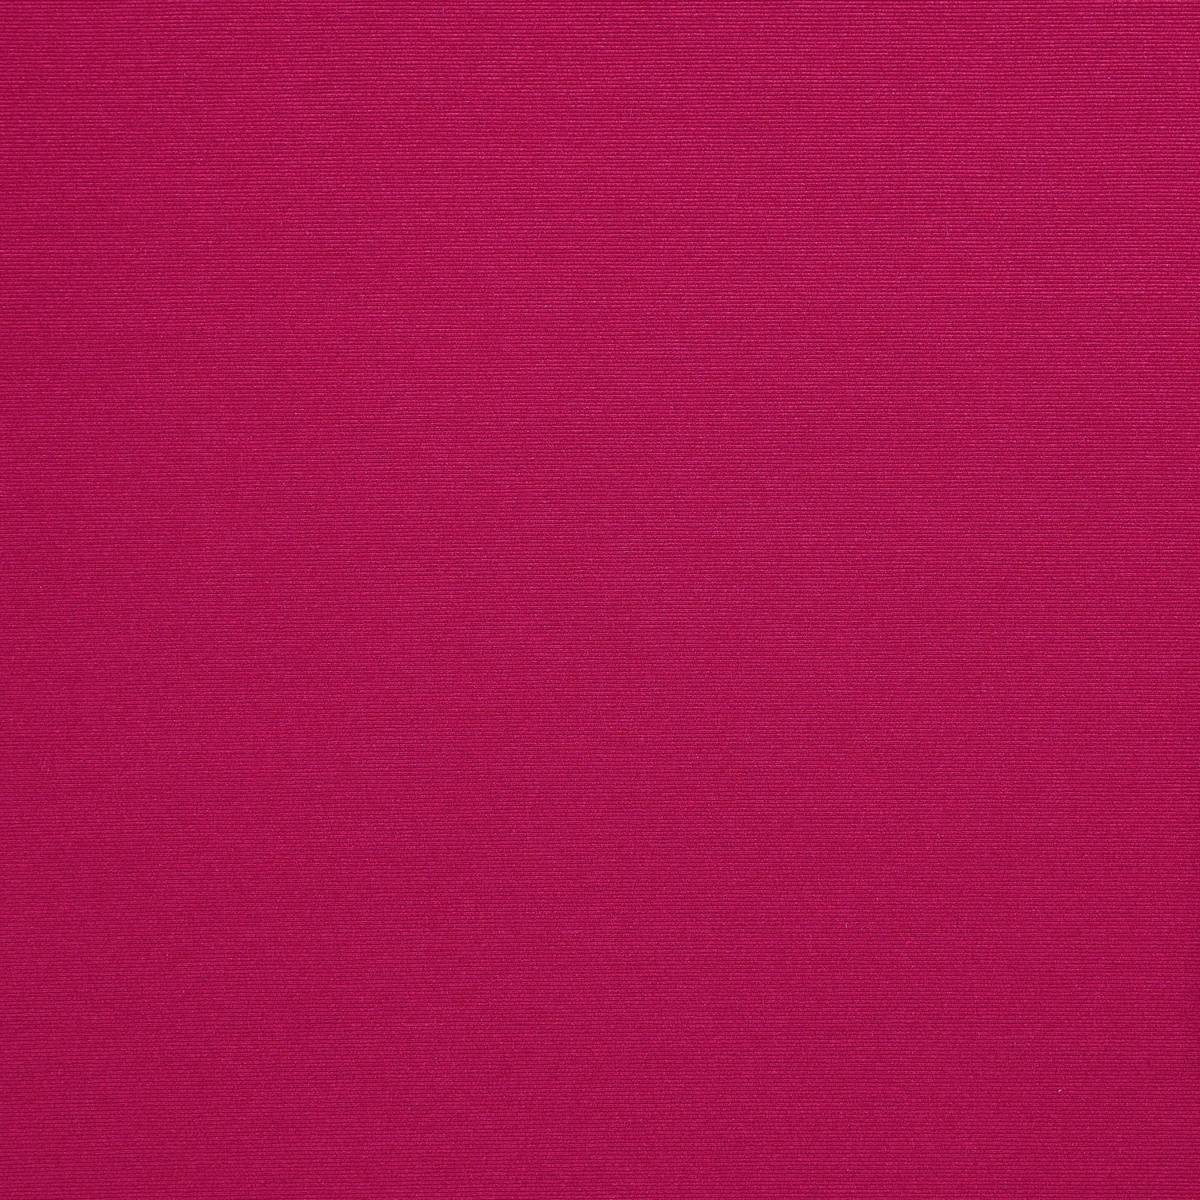 Optix Carnival Pink Fabric by Harlequin